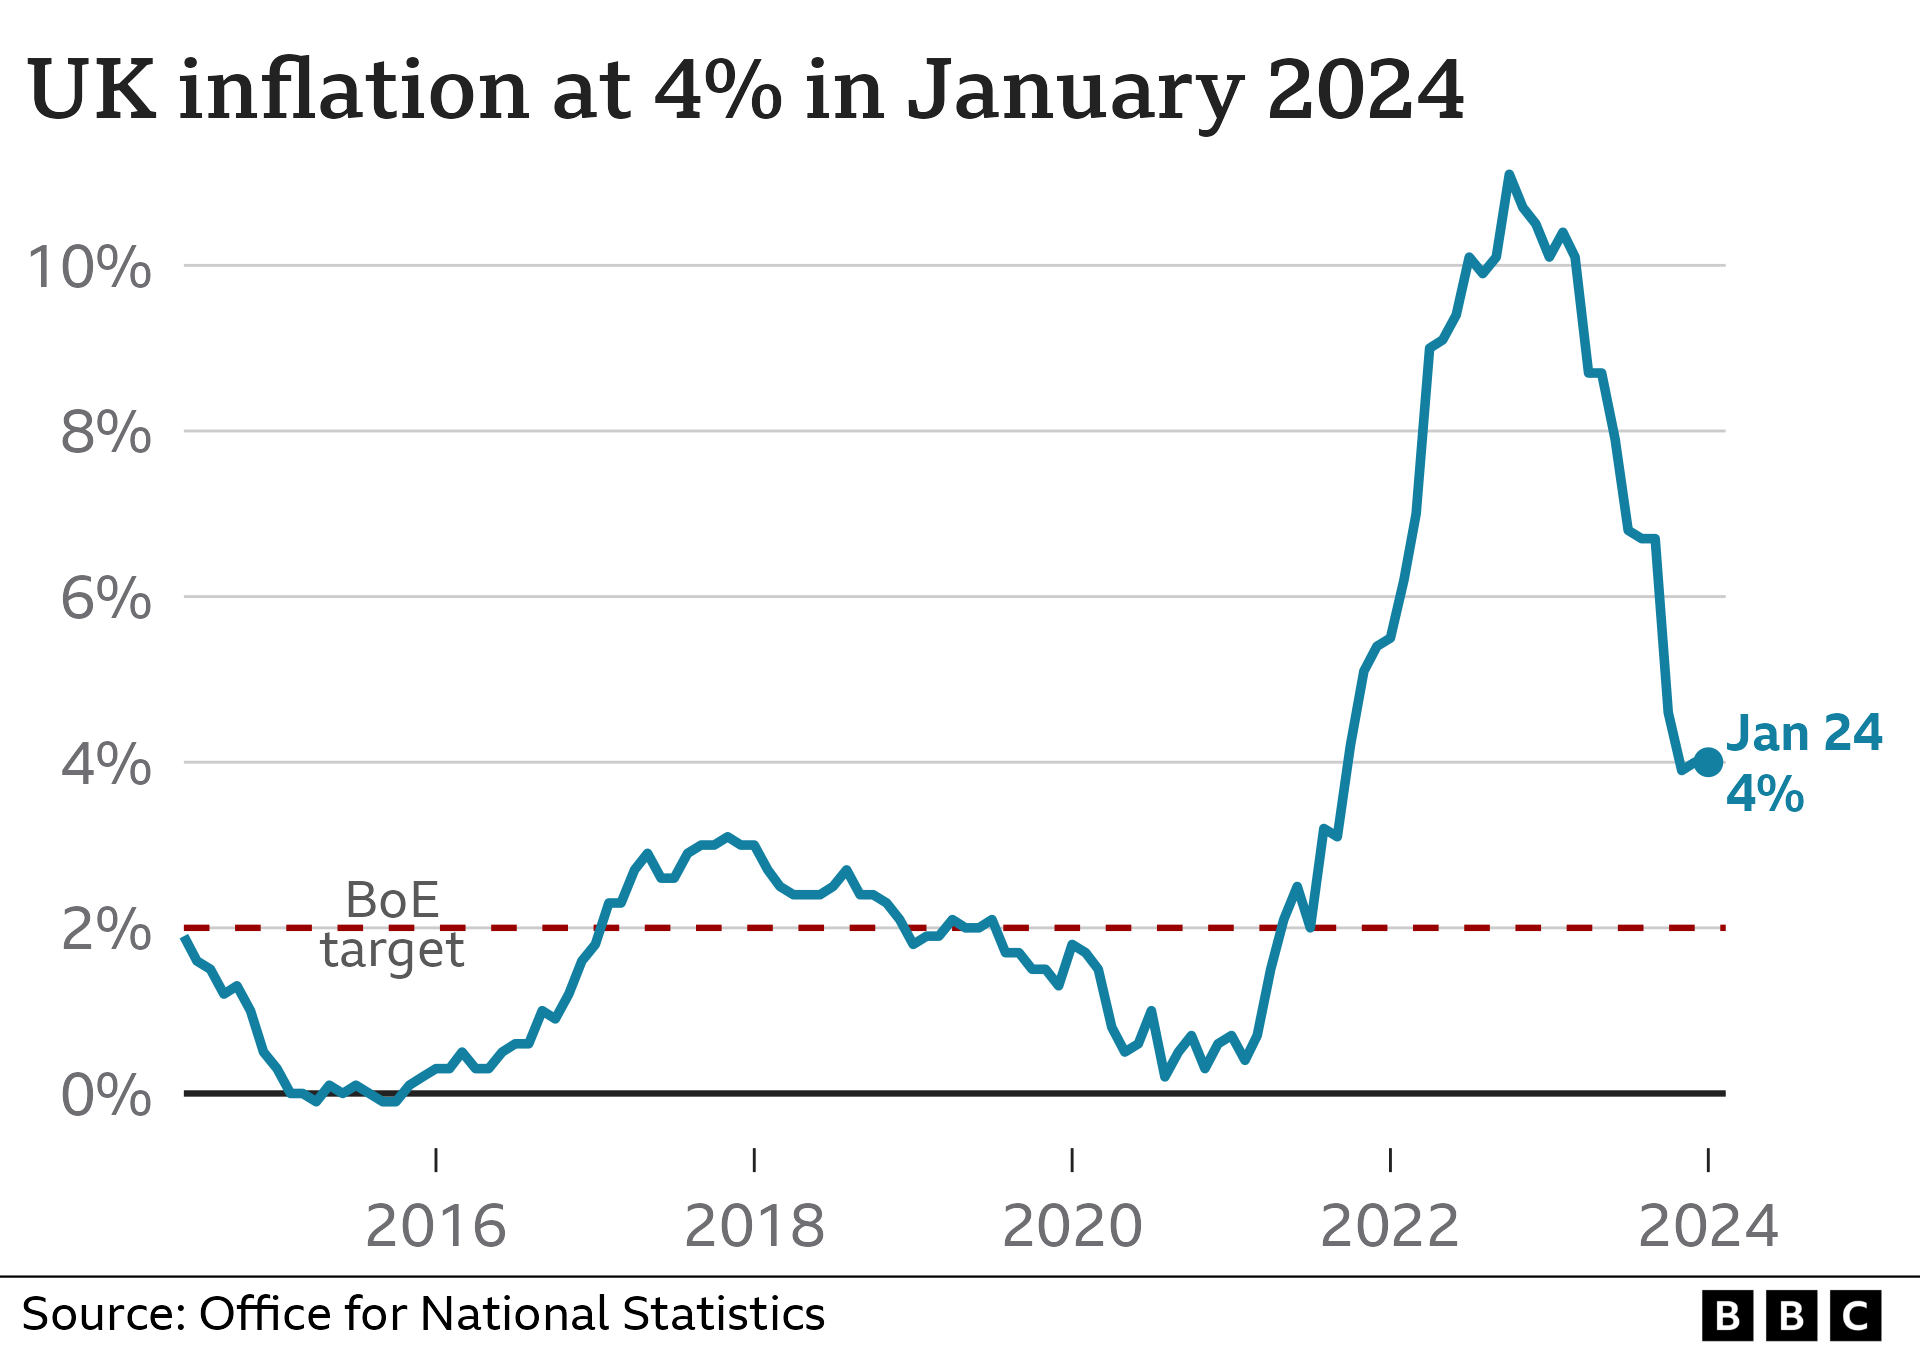 Chart showing UK inflation at 4% in January